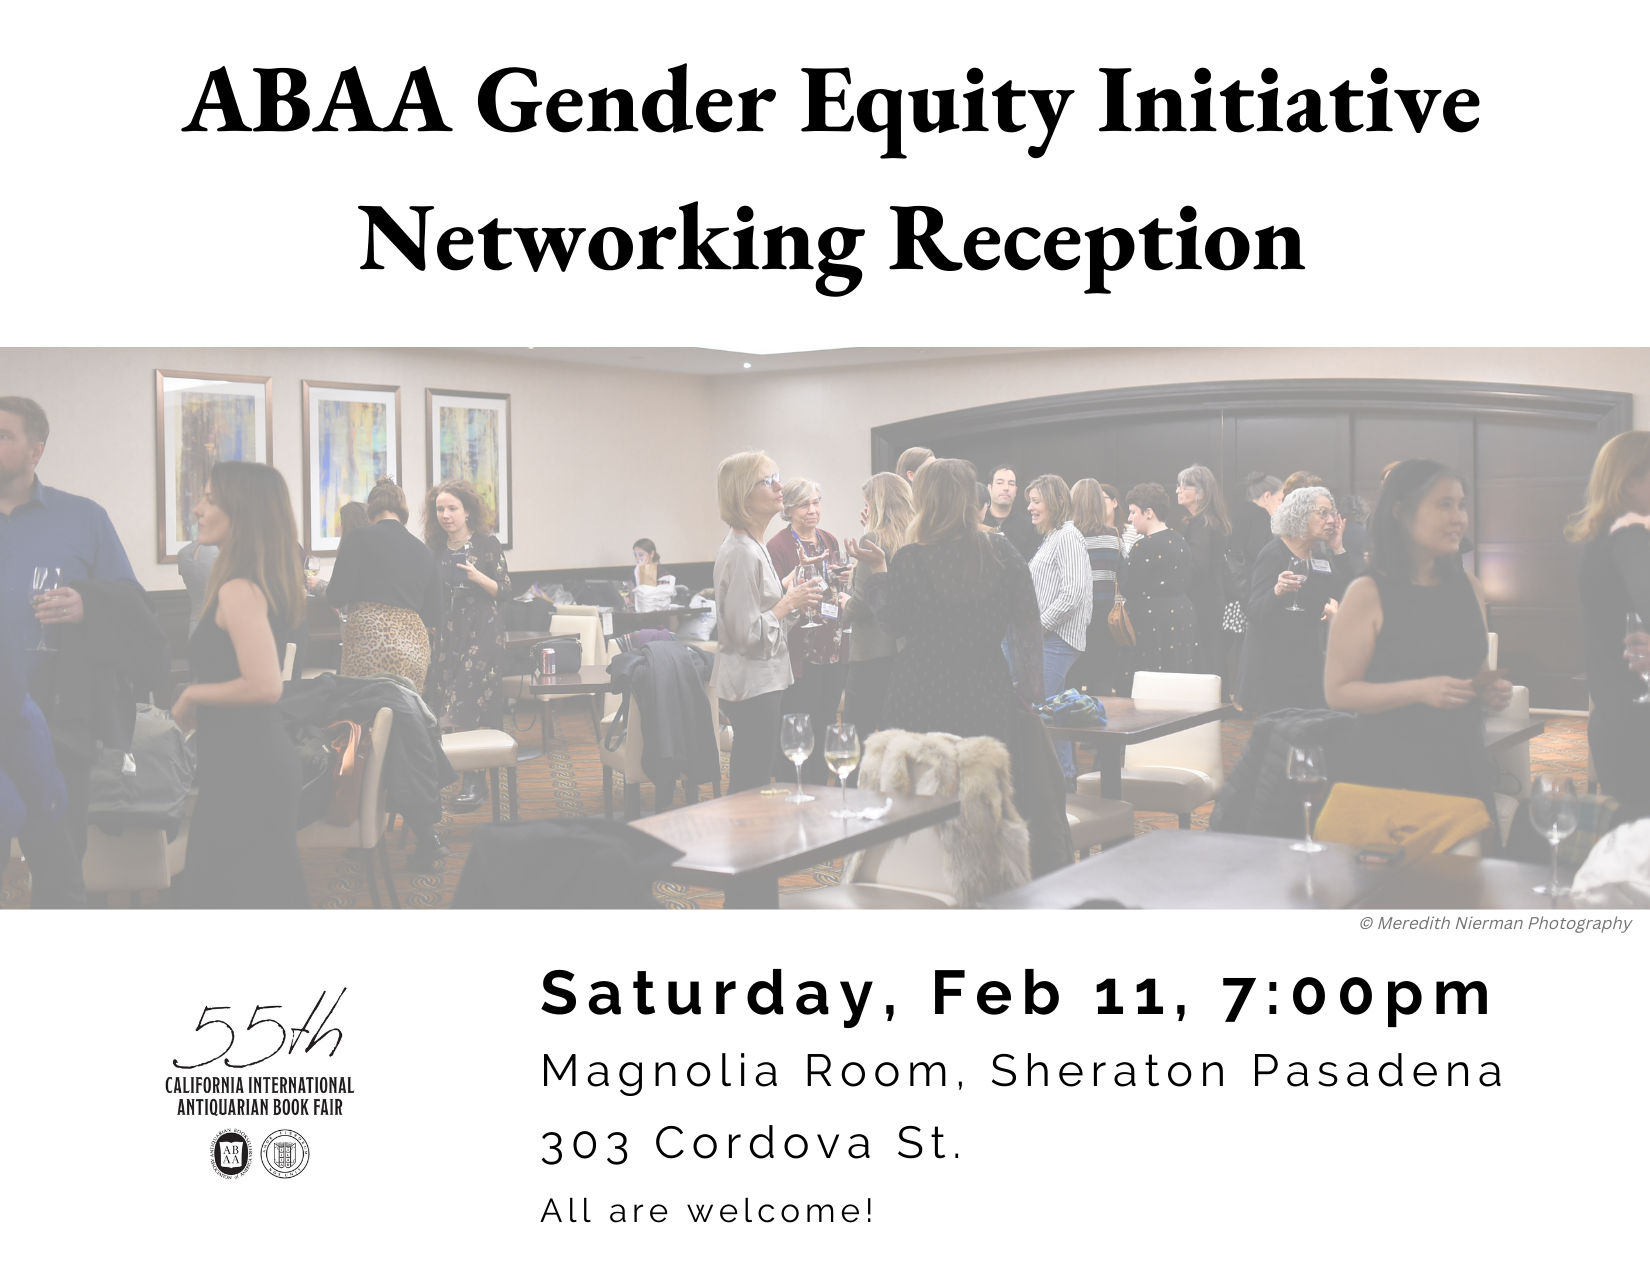 ABAA Gender Equity Initiative Networking Reception